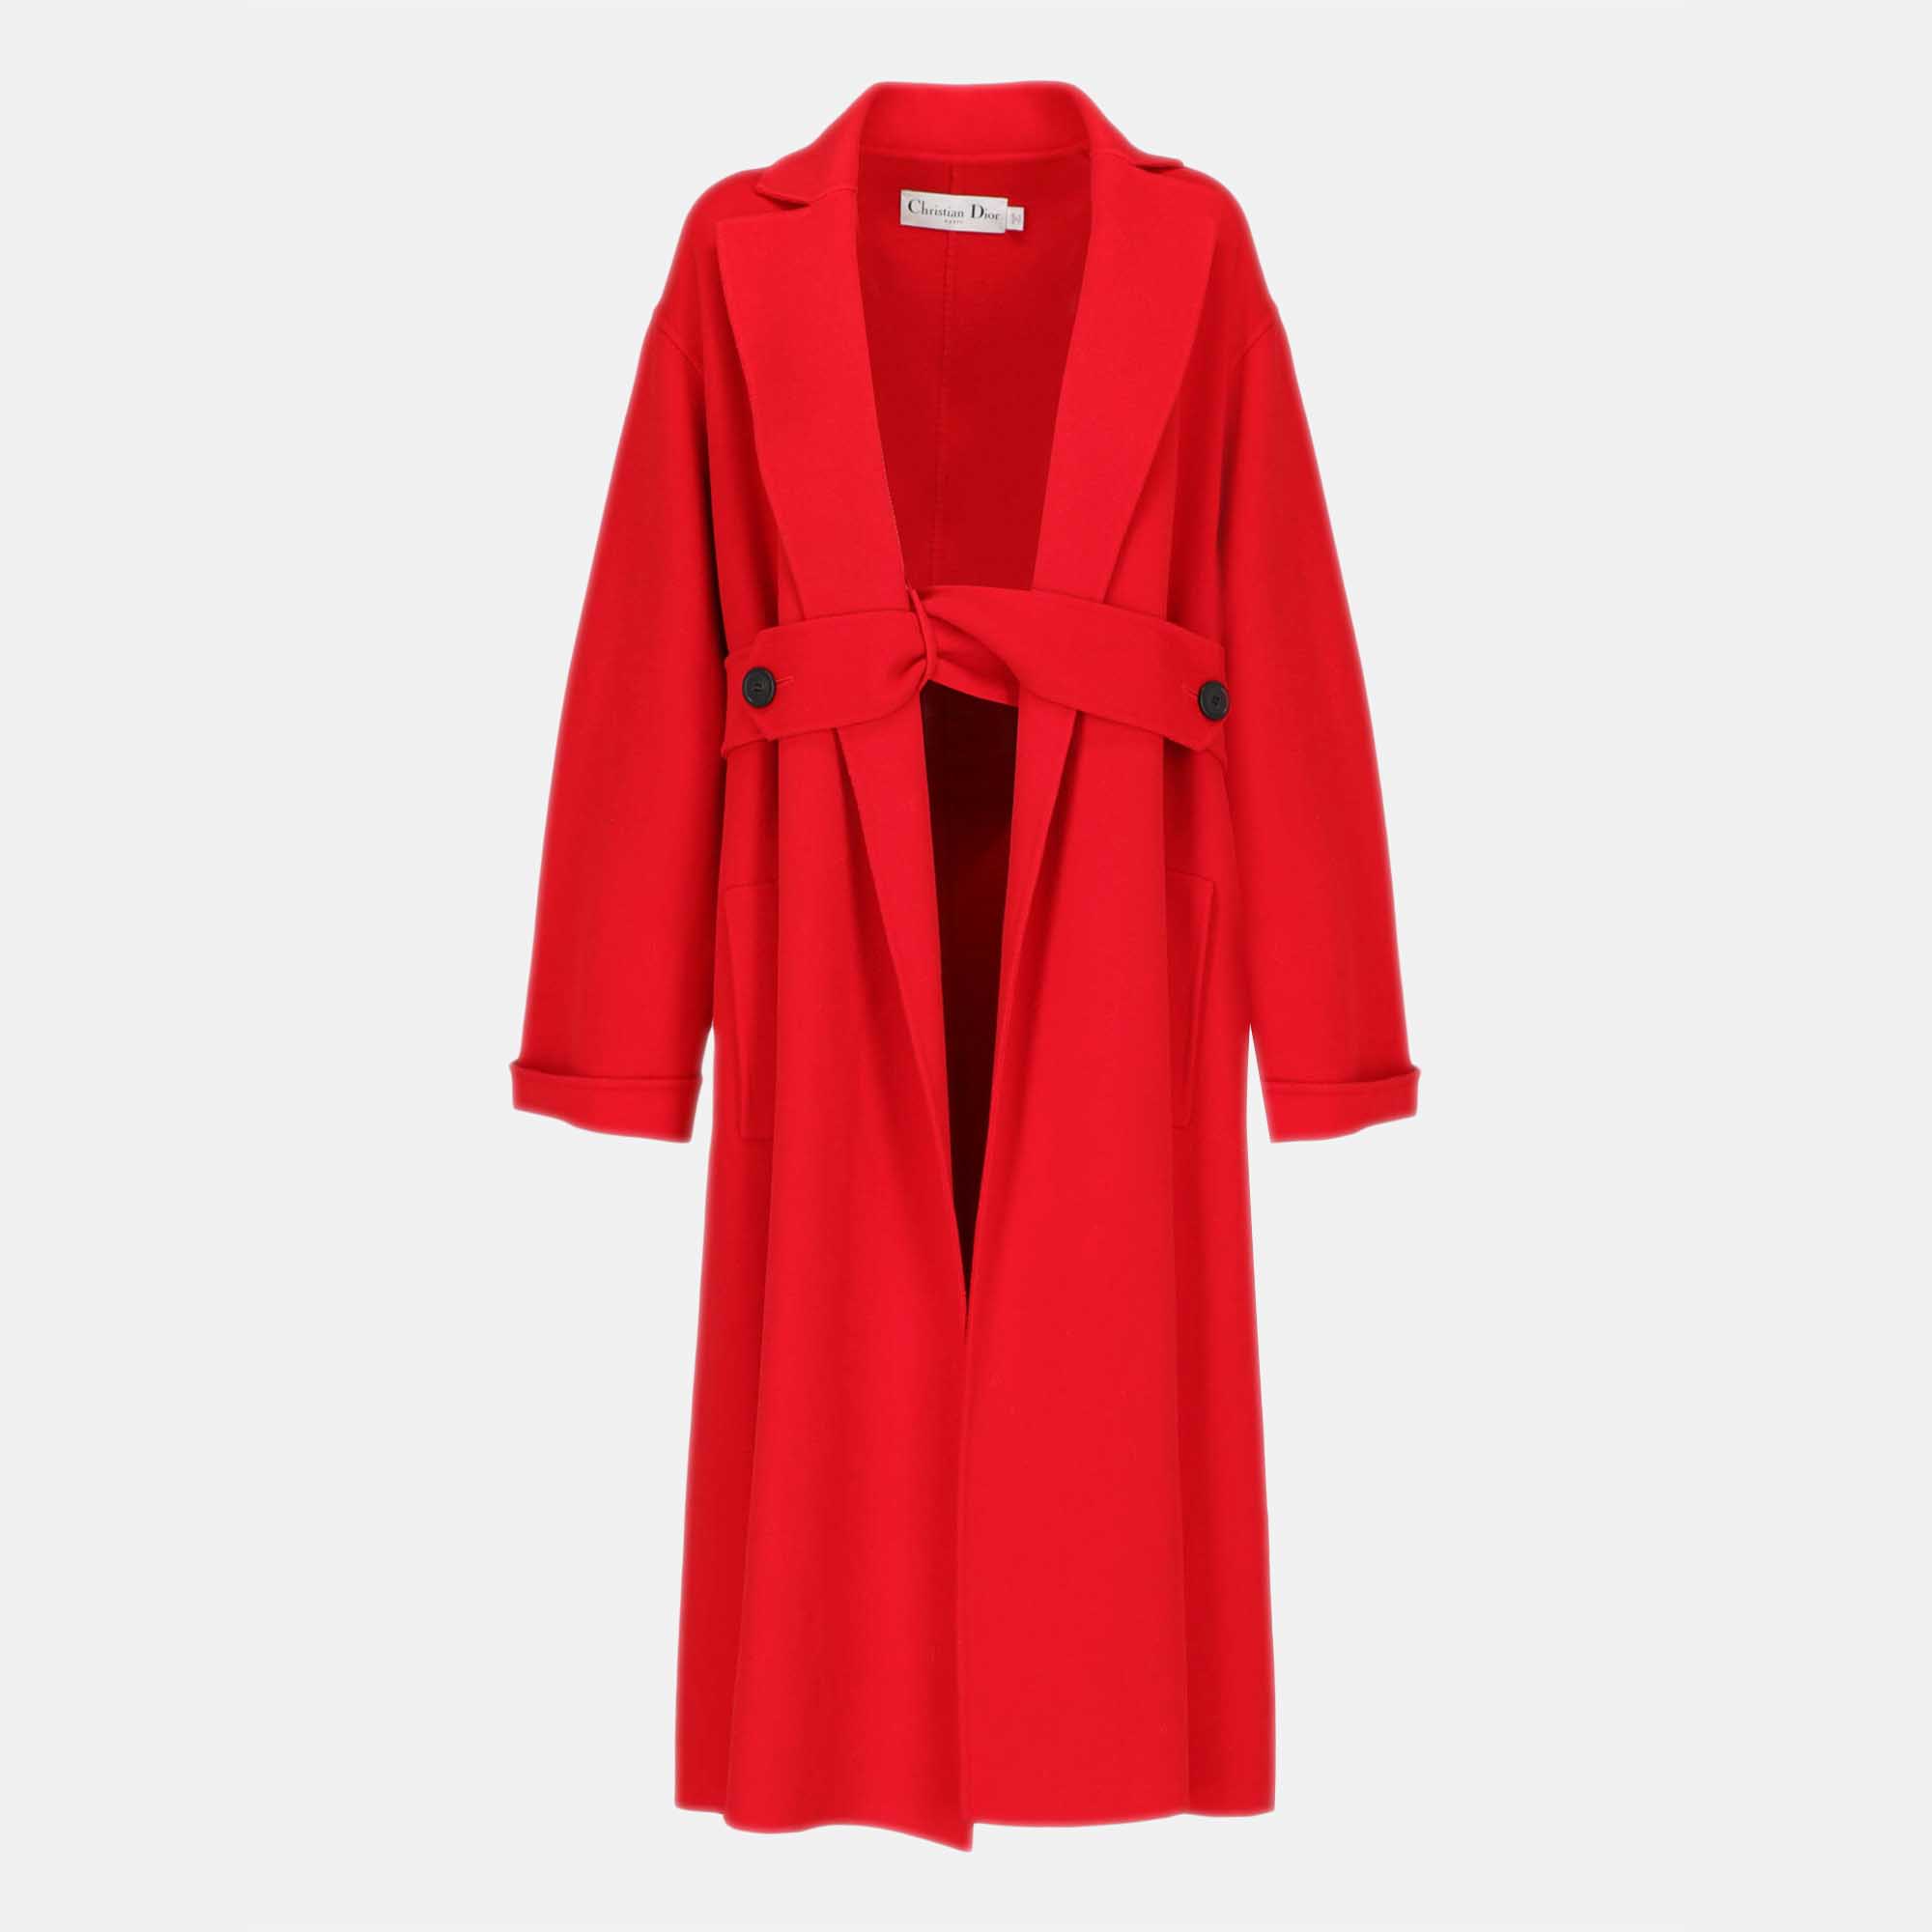 Dior  Women's Wool Single Breasted Coat - Red - S